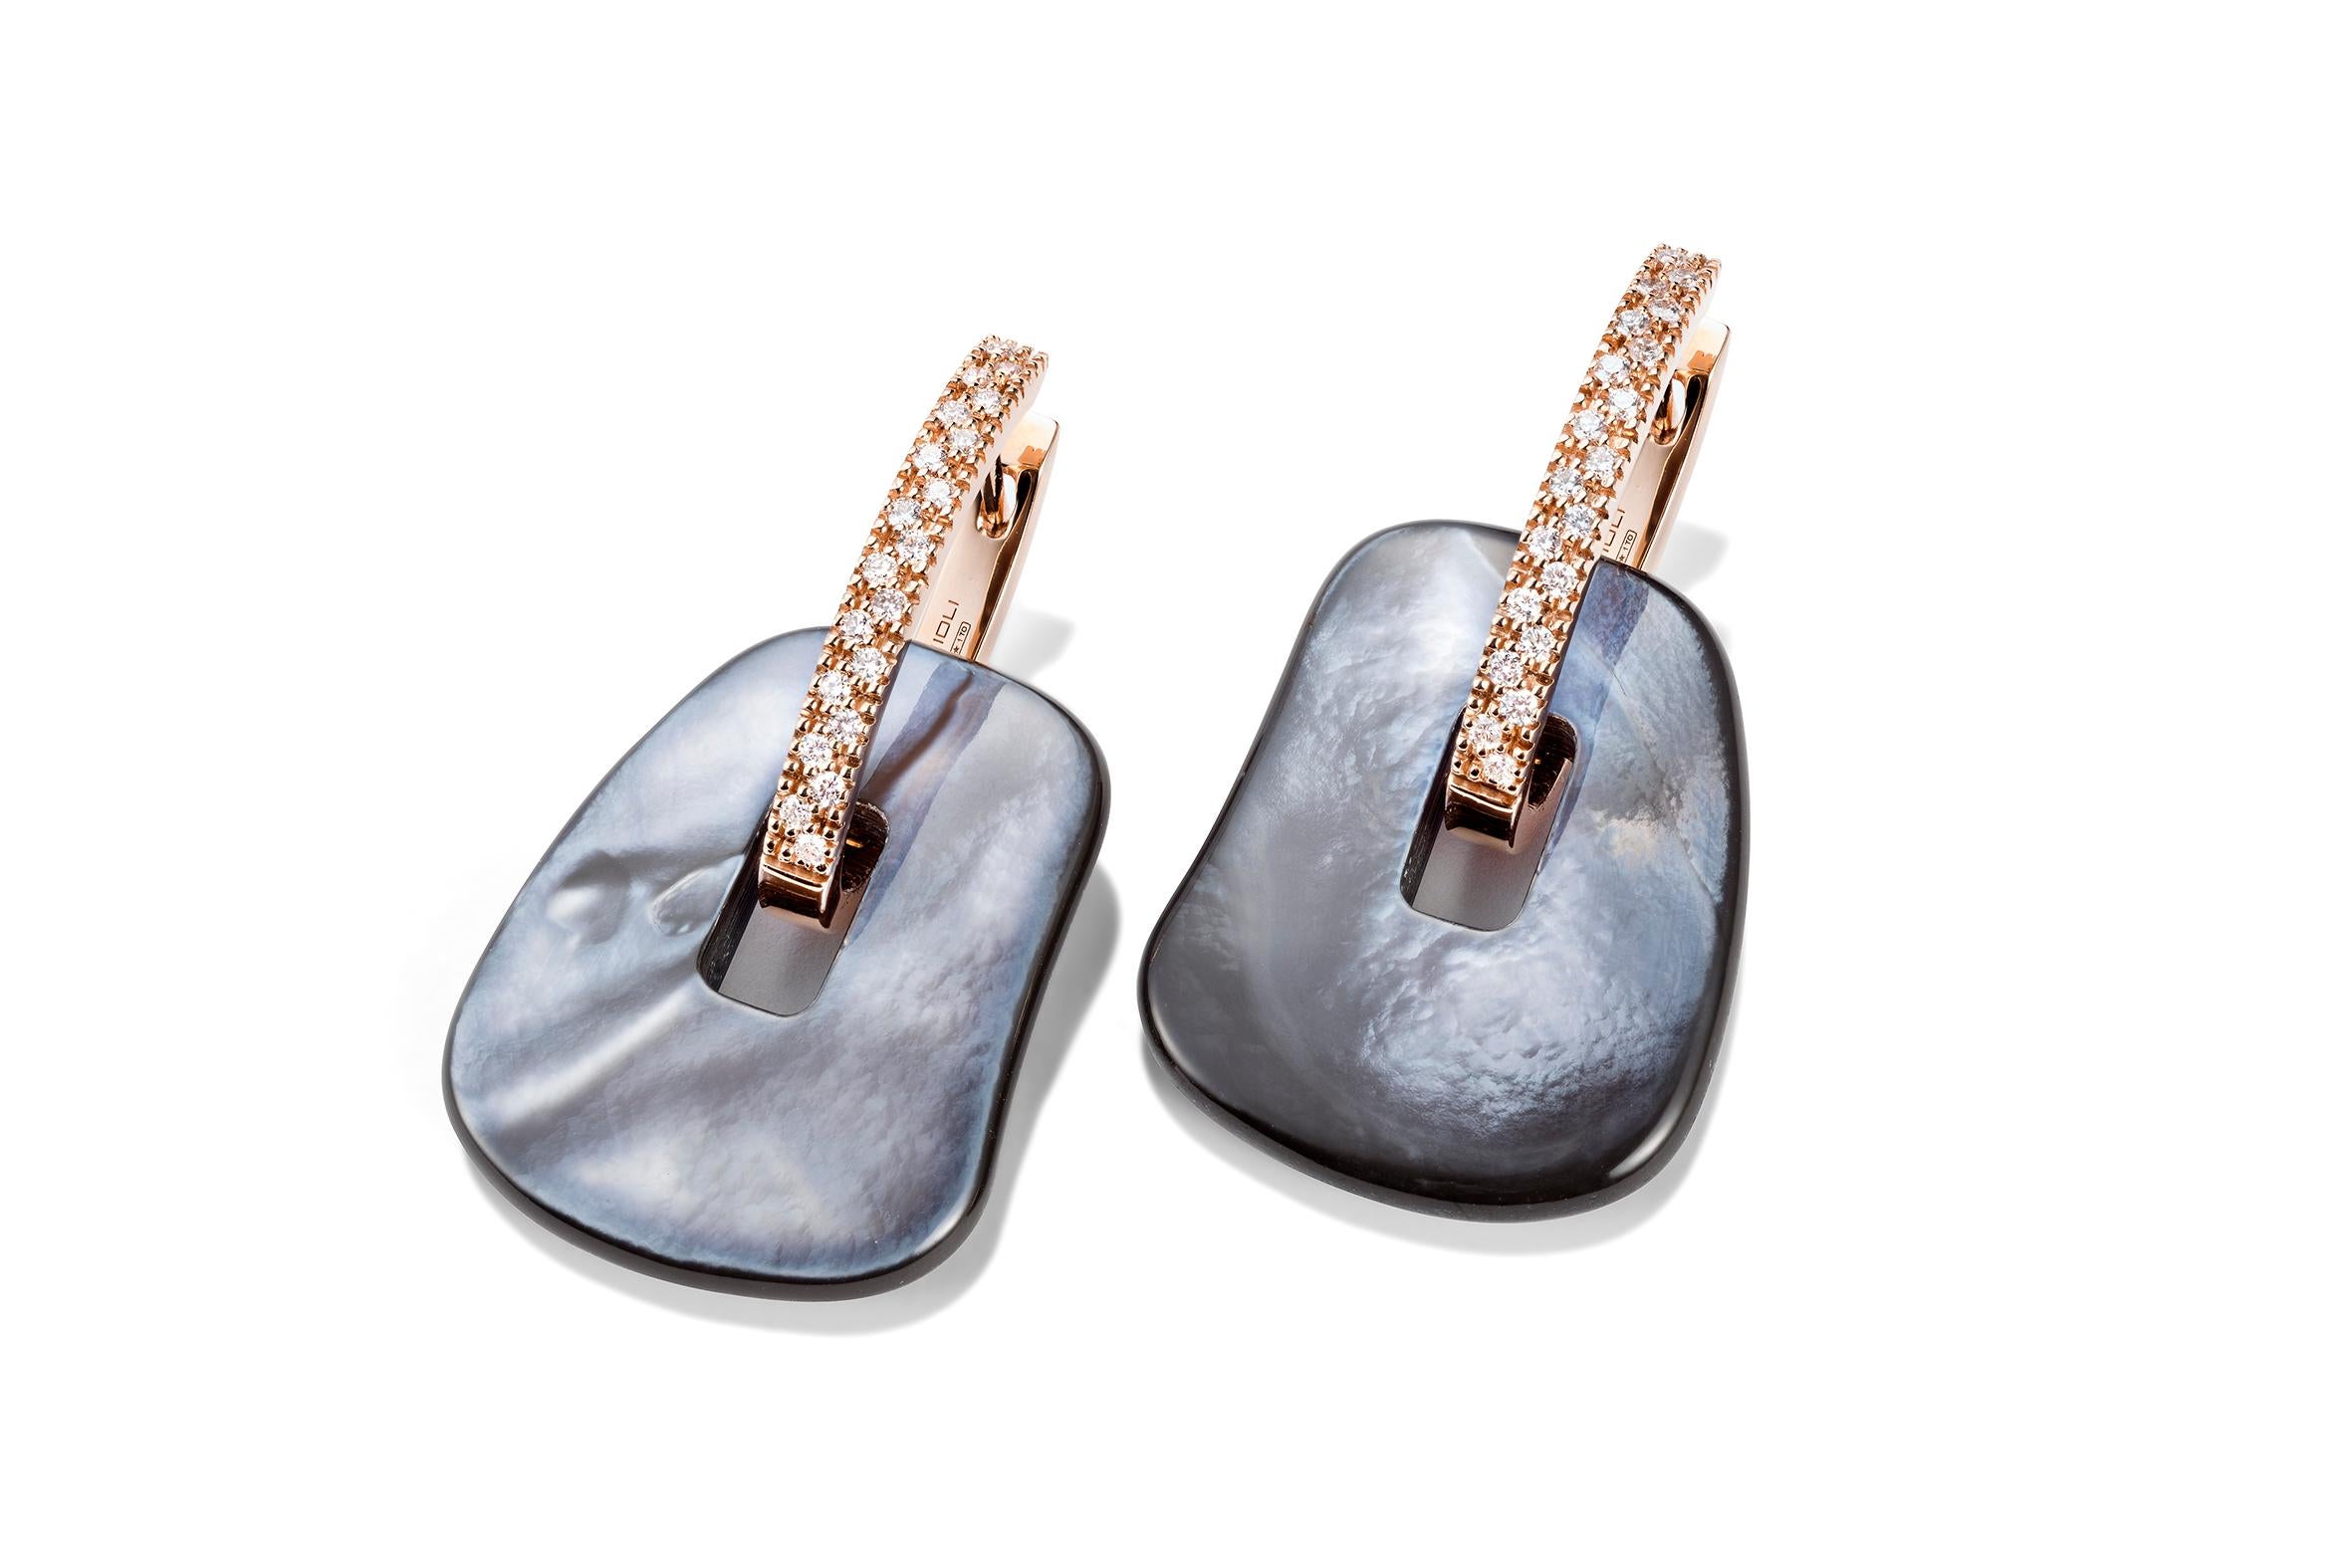 Mattioli Puzzle Safari Small 18K Rose Gold Earrings Brown Enamel w/White Diamonds
Also available in Brown Diamonds
Earrings in rose gold 
Diamonds carat 0.40 ct
Weight 19.60 gr  Measure 15x18mm or 0.60x0.70 inches
Puzzle pendants of mother of pearl